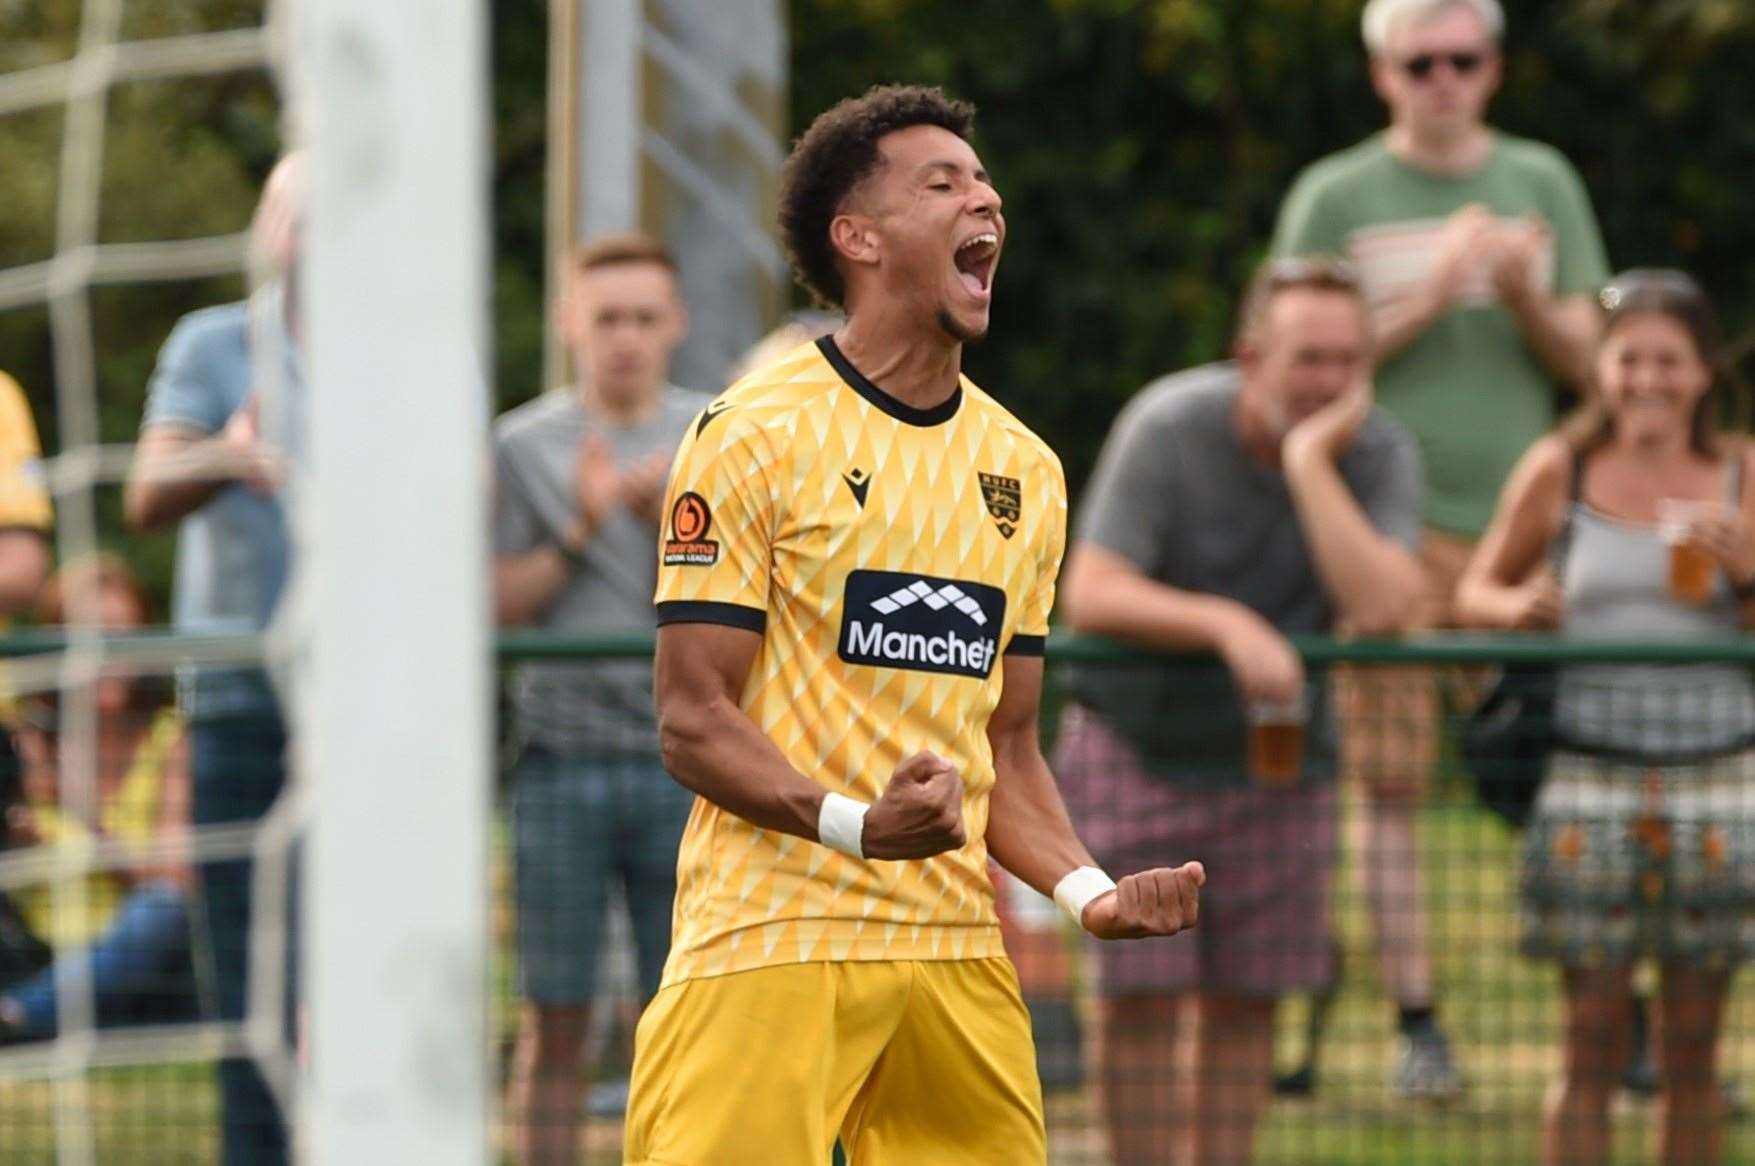 Sol Wanjau-Smith celebrates his hat-trick goal at Steyning. Picture: Steve Terrell